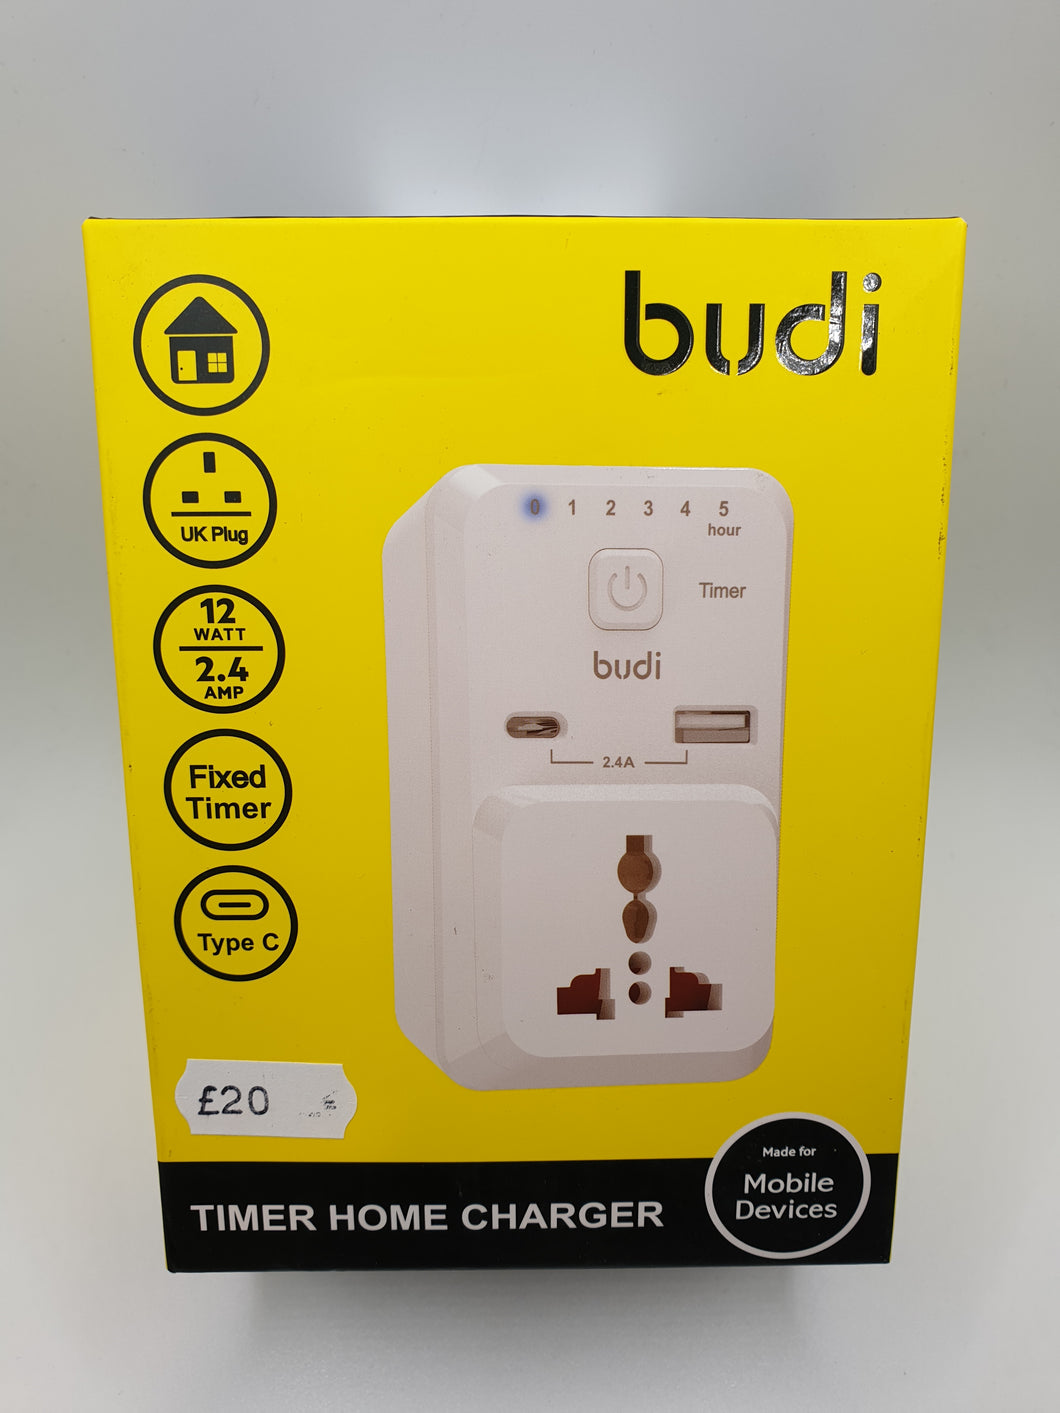 Budi Timer Home Charger For Smartphones Tablets Fast Charging With Type-C & USB Sockets Use International Sockets Shaver On 3 Pin Plug UK